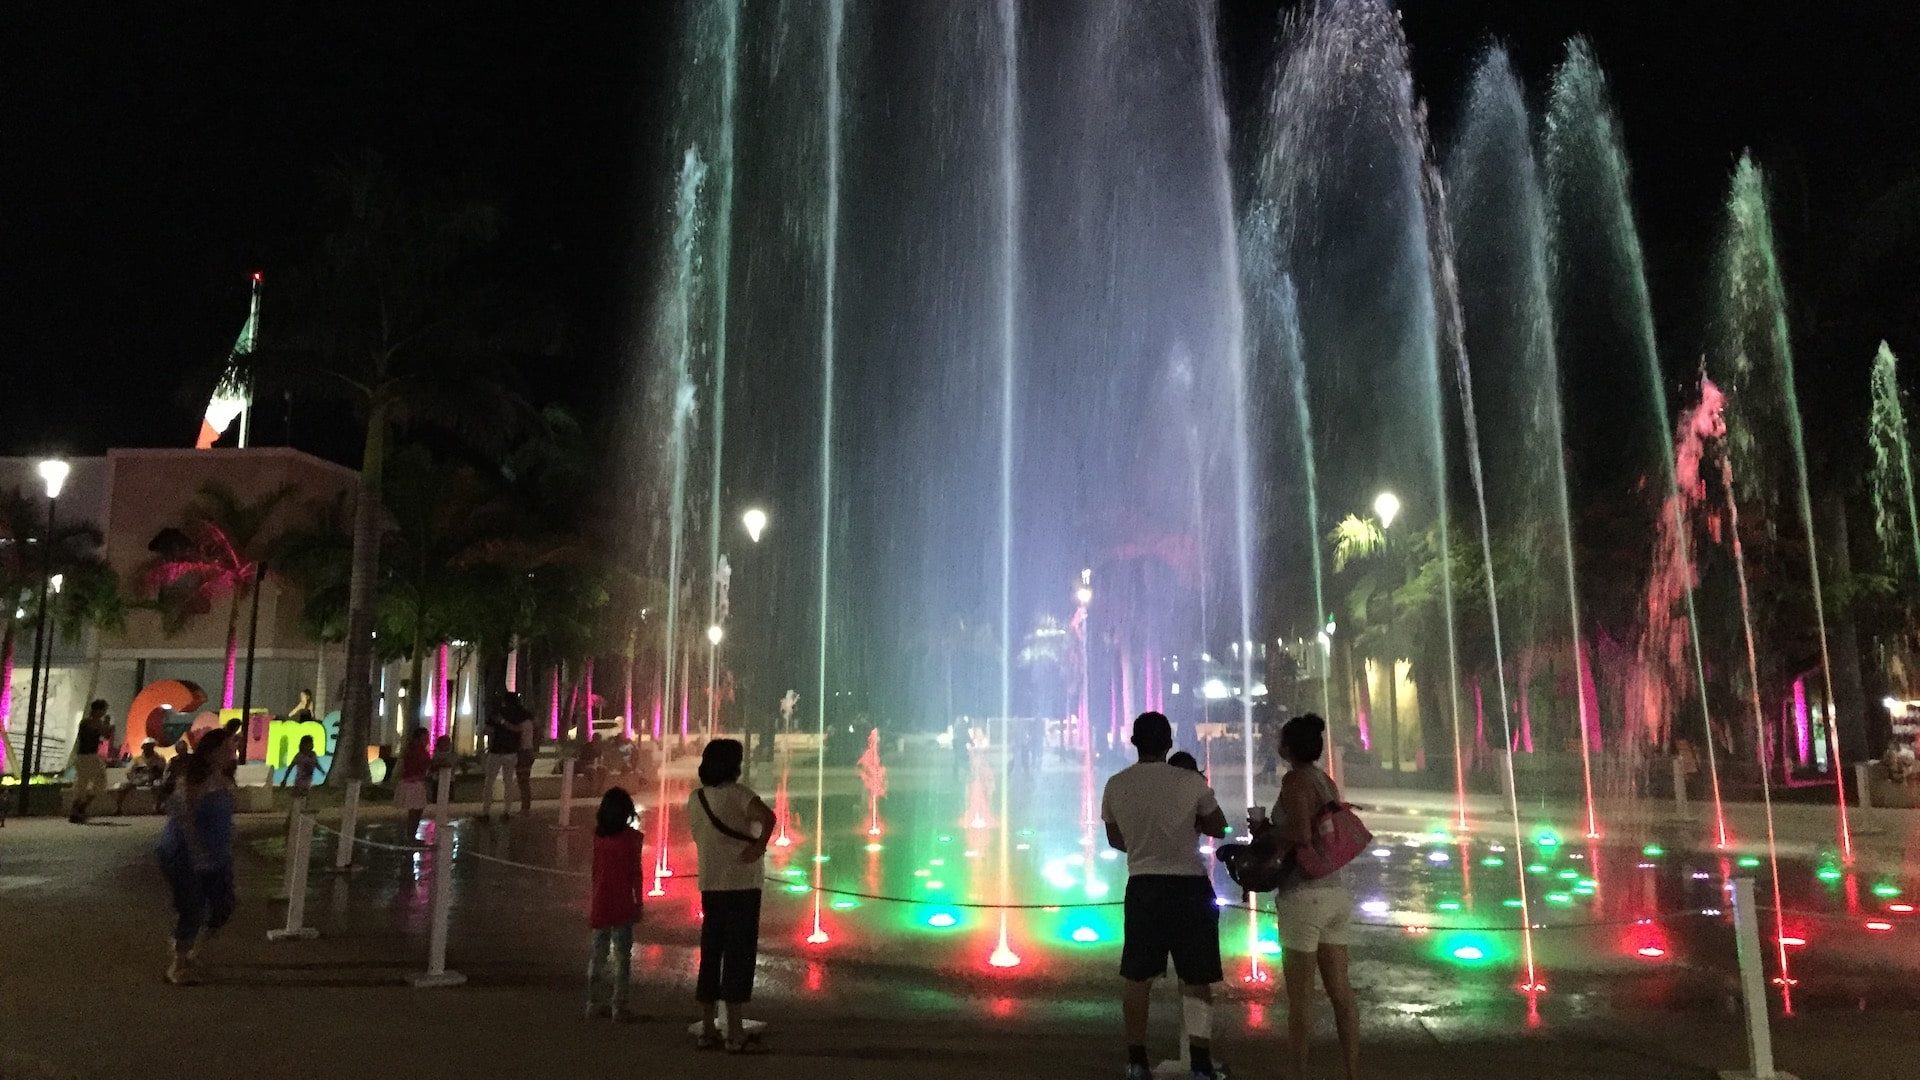 Water fountain display with colored lights in Cozumel's town square.